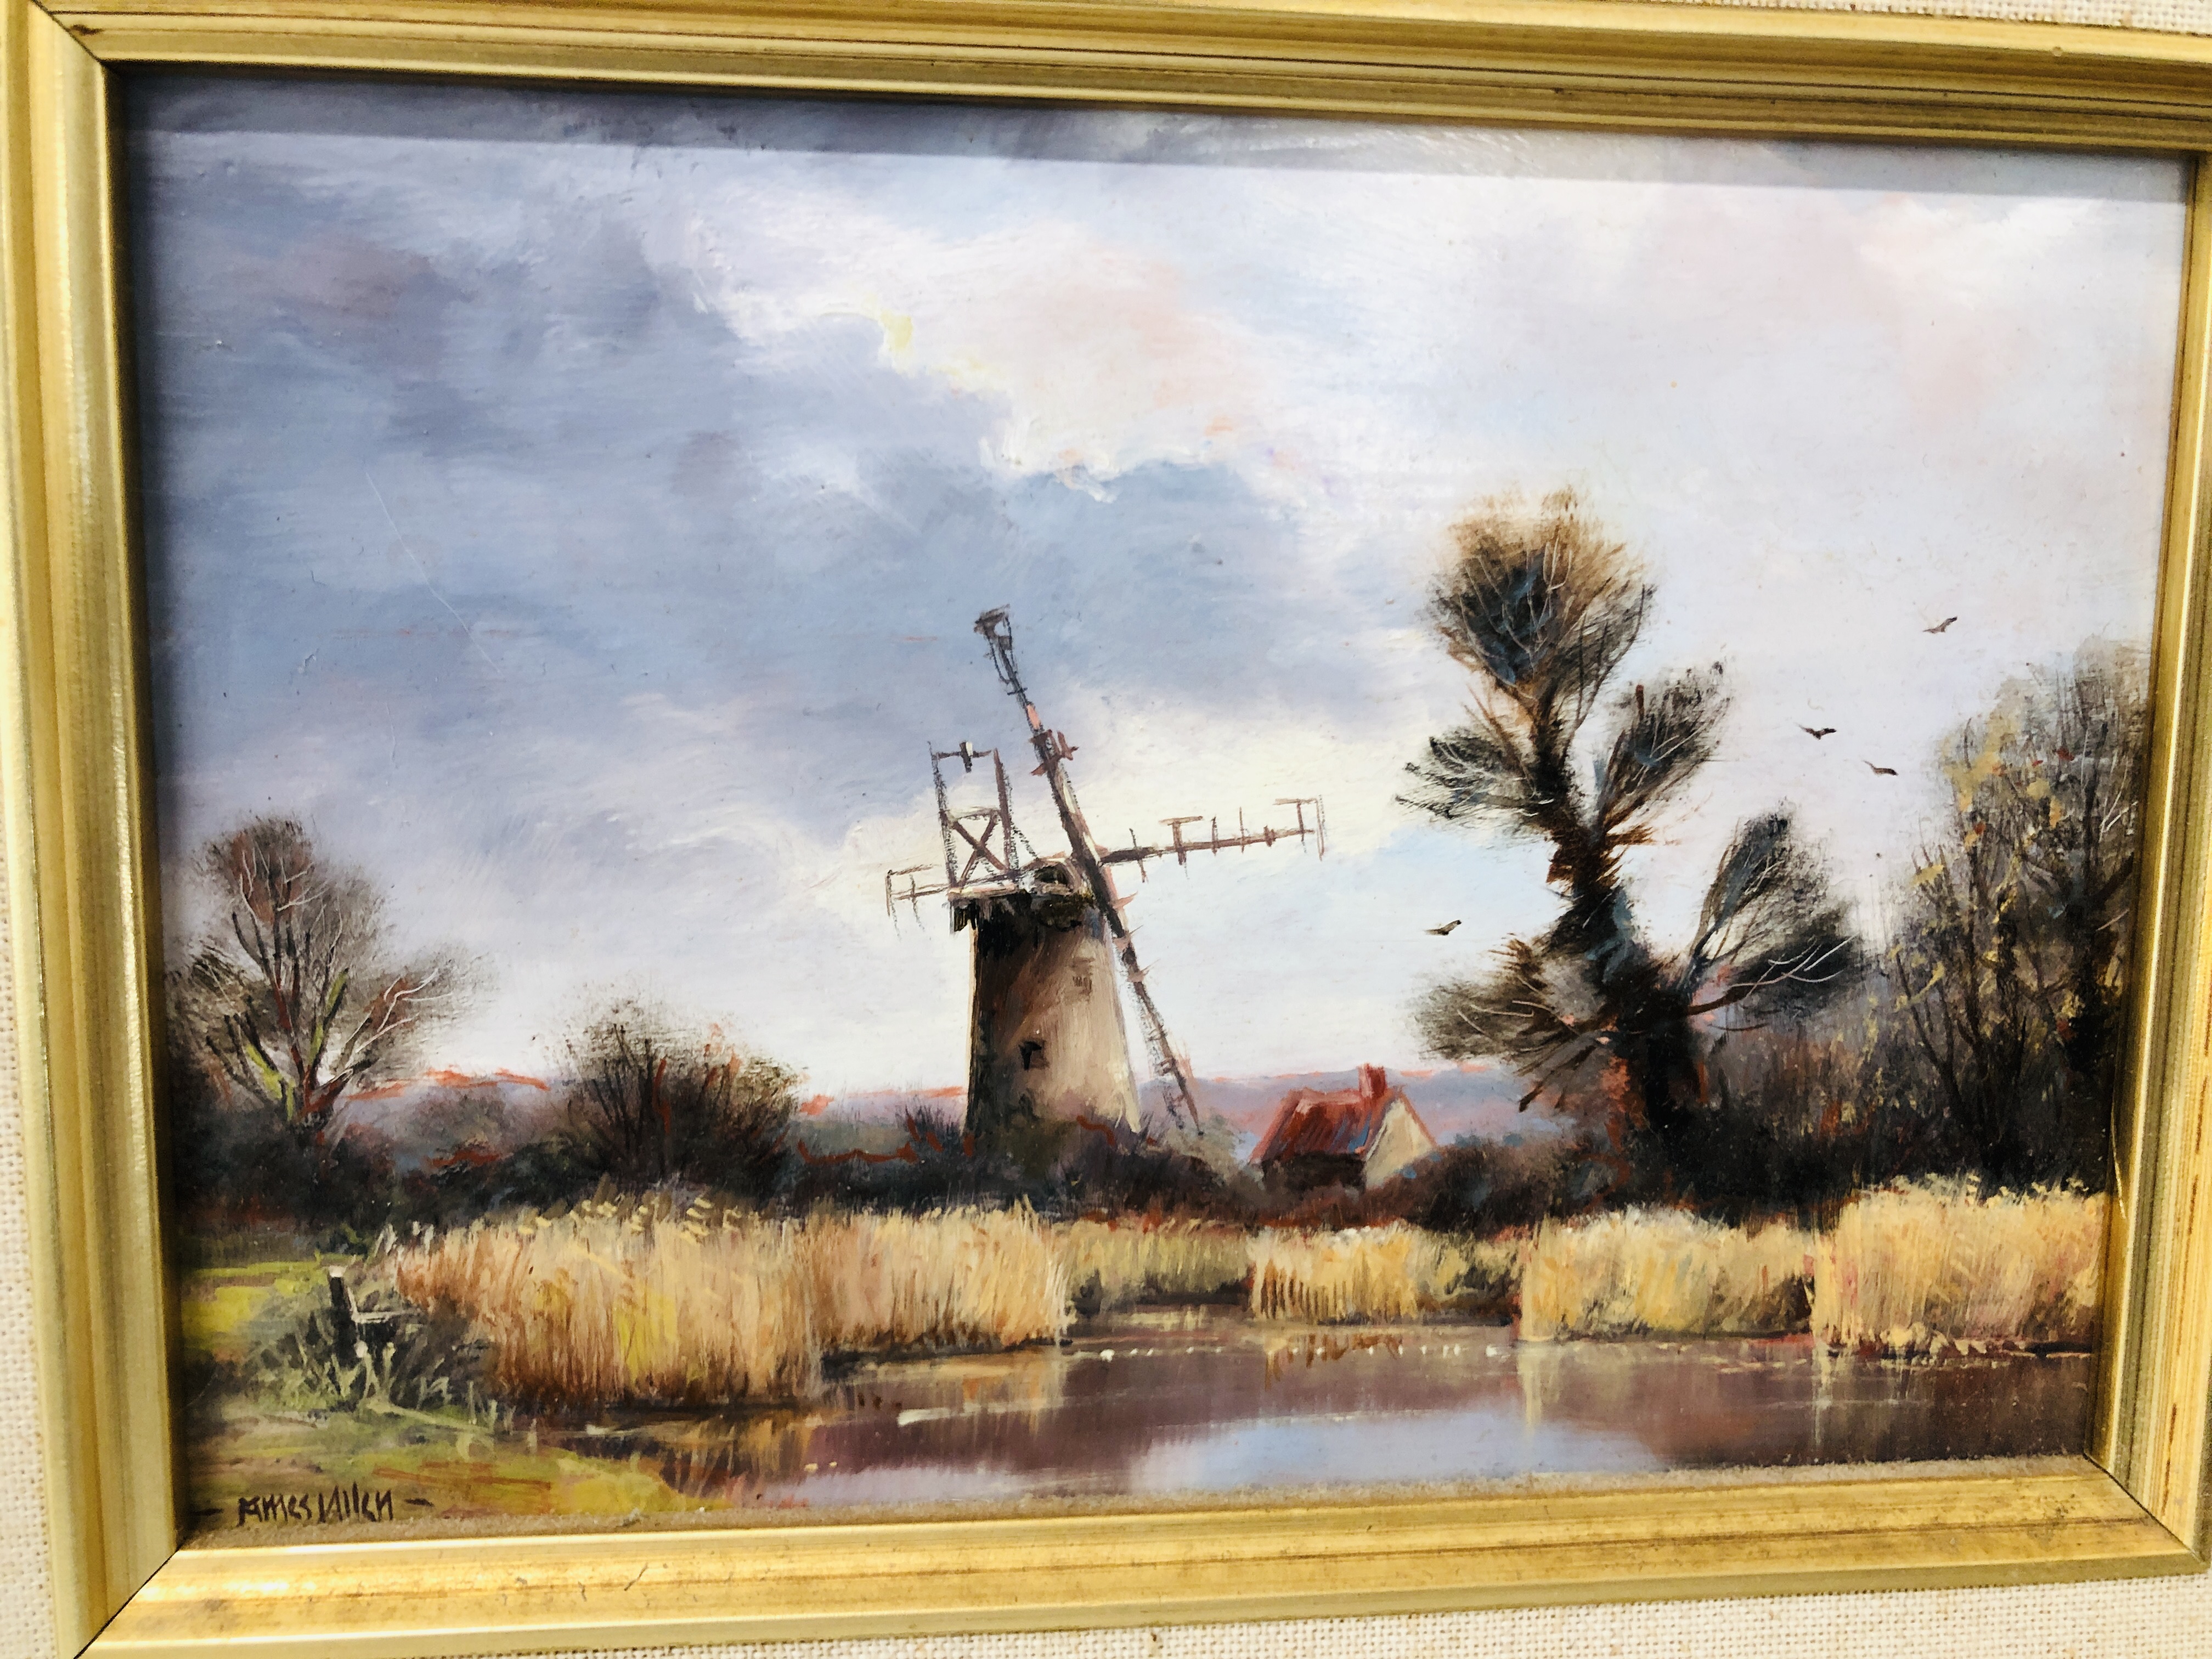 TWO ORIGINAL JAMES ALLEN OIL ON BOARDS "NORFOLK WHERRY" AND "MILL NR. HICKLING" NORFOLK - EACH 11. - Image 5 of 8